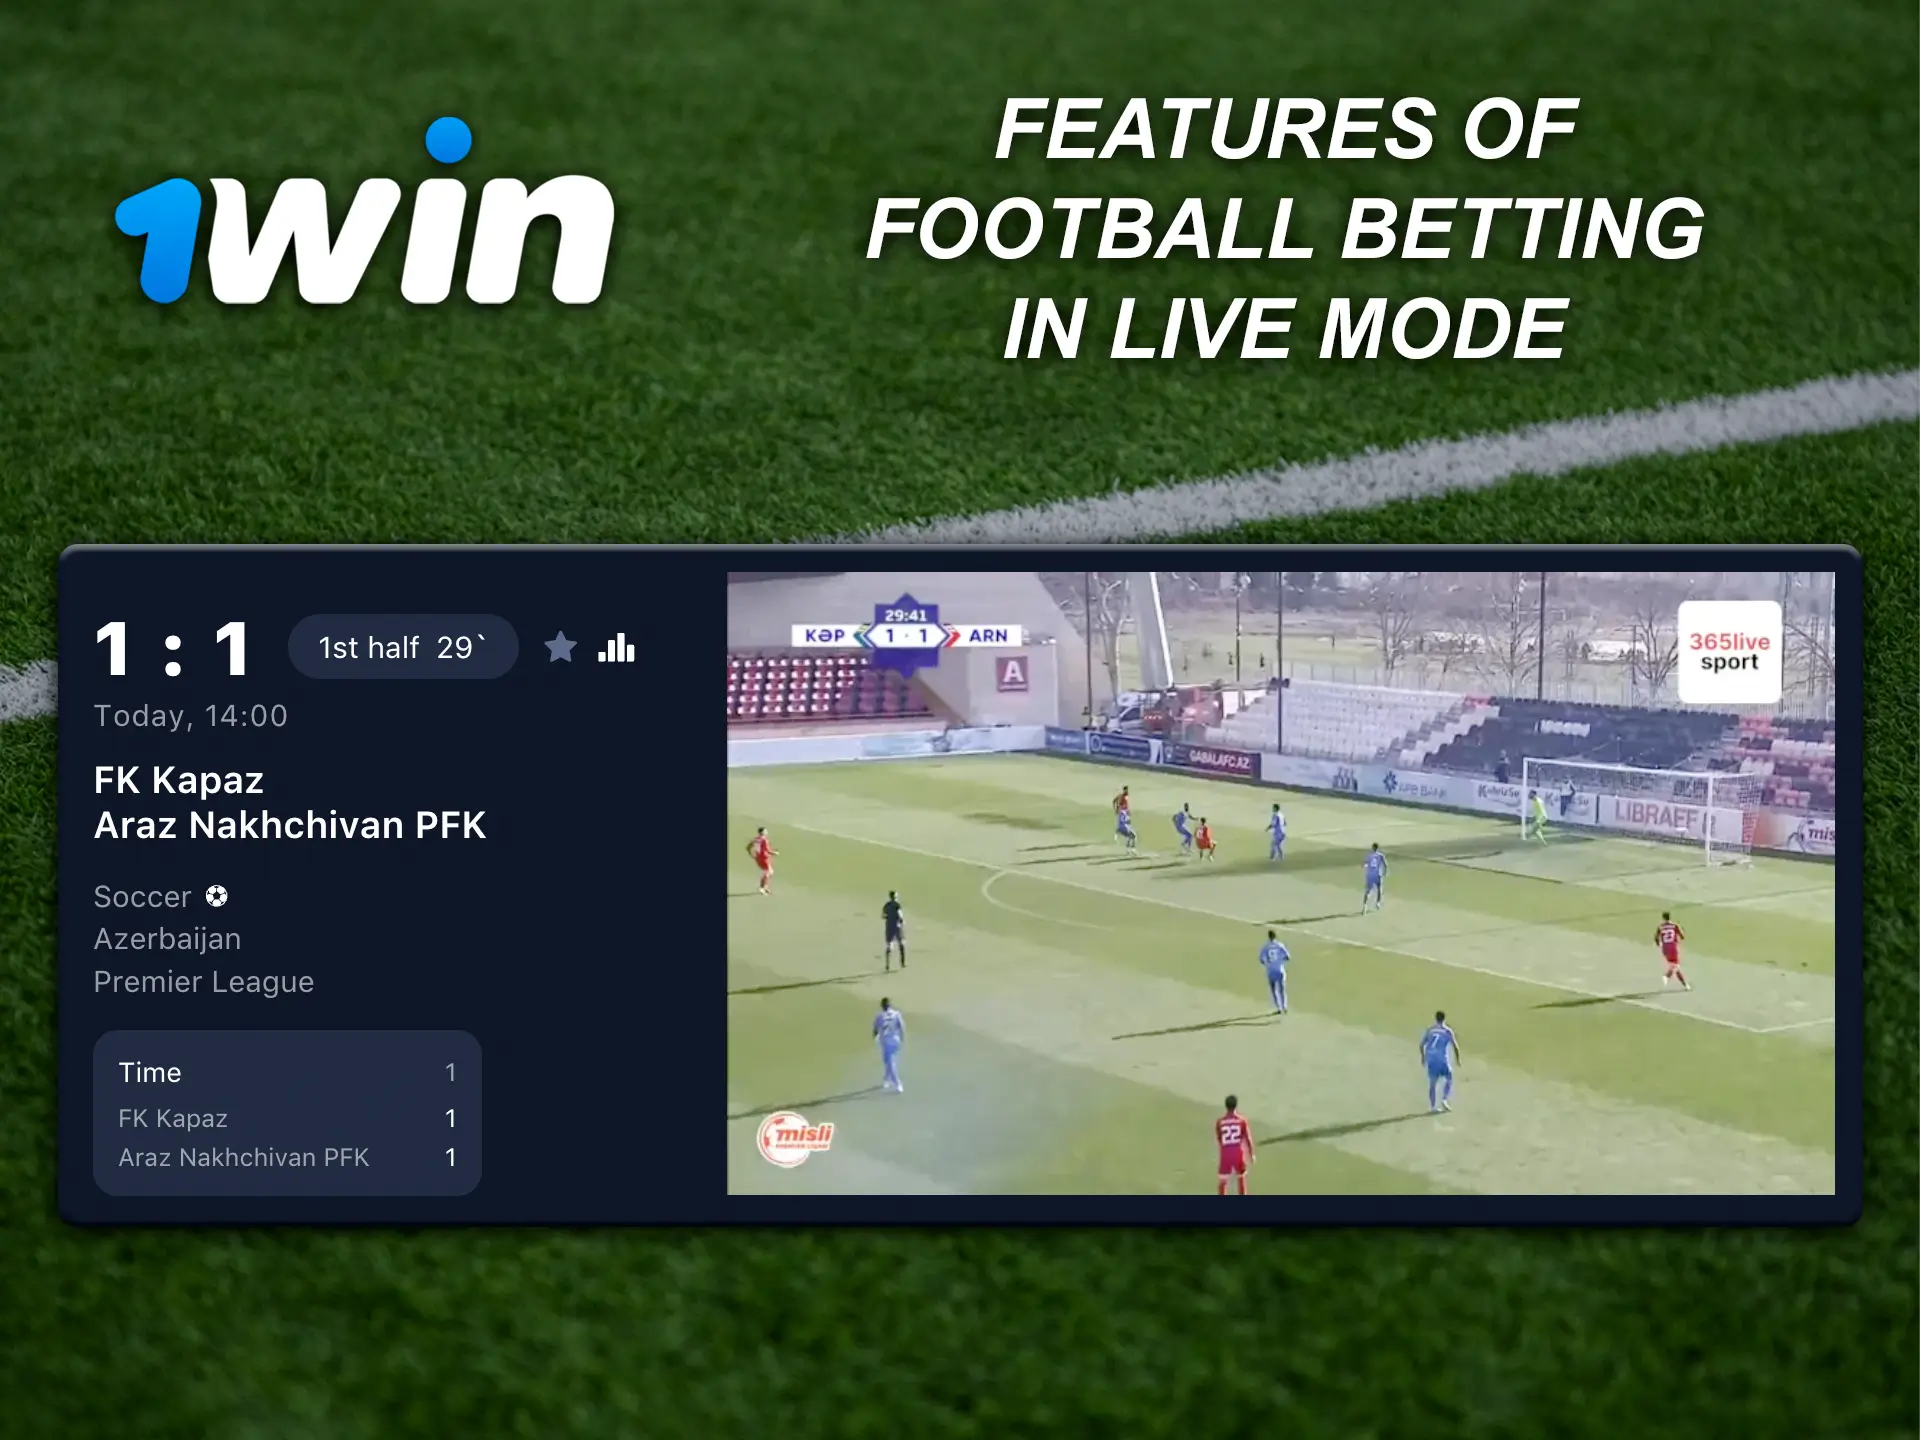 Enjoy the game of your favourite team thanks to live streaming at 1Win and bet online.